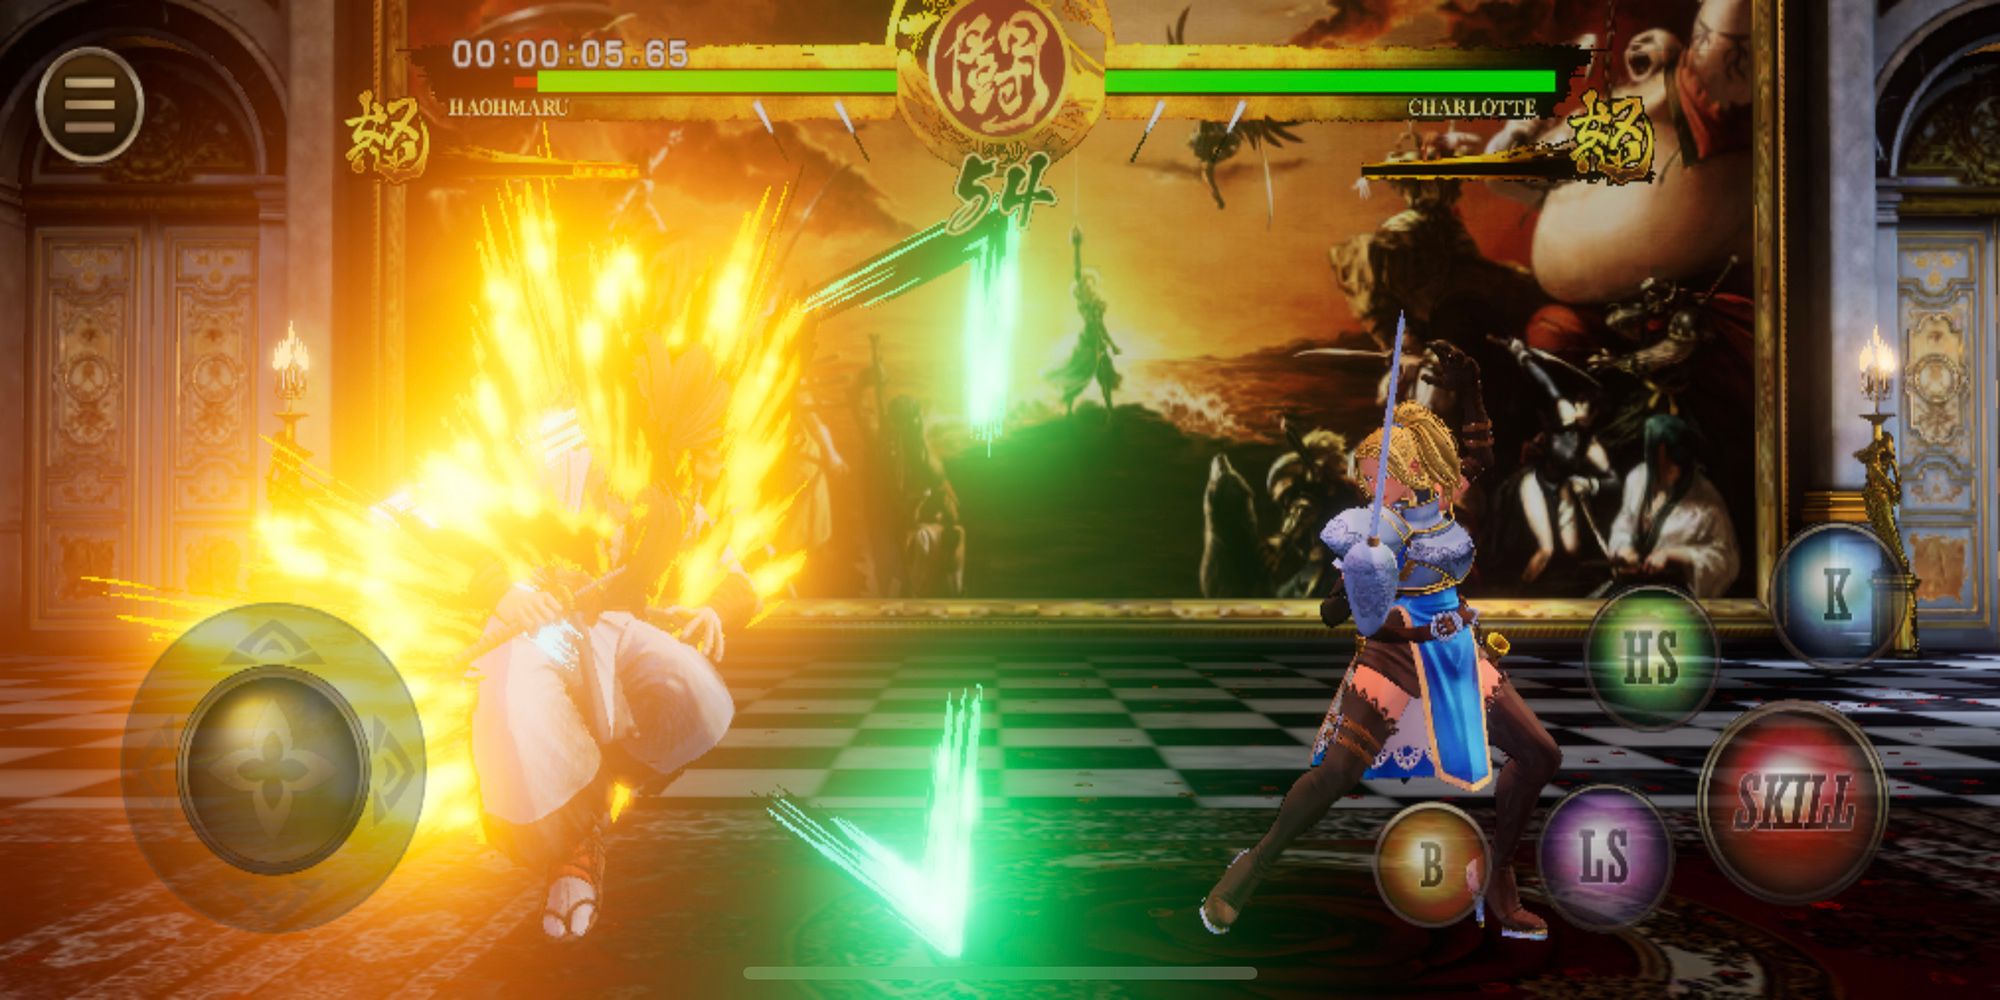 Charlotte strikes Haohmaru with a green projectile attack during a battle at the Versailles Palace in Samurai Shodown iOS.